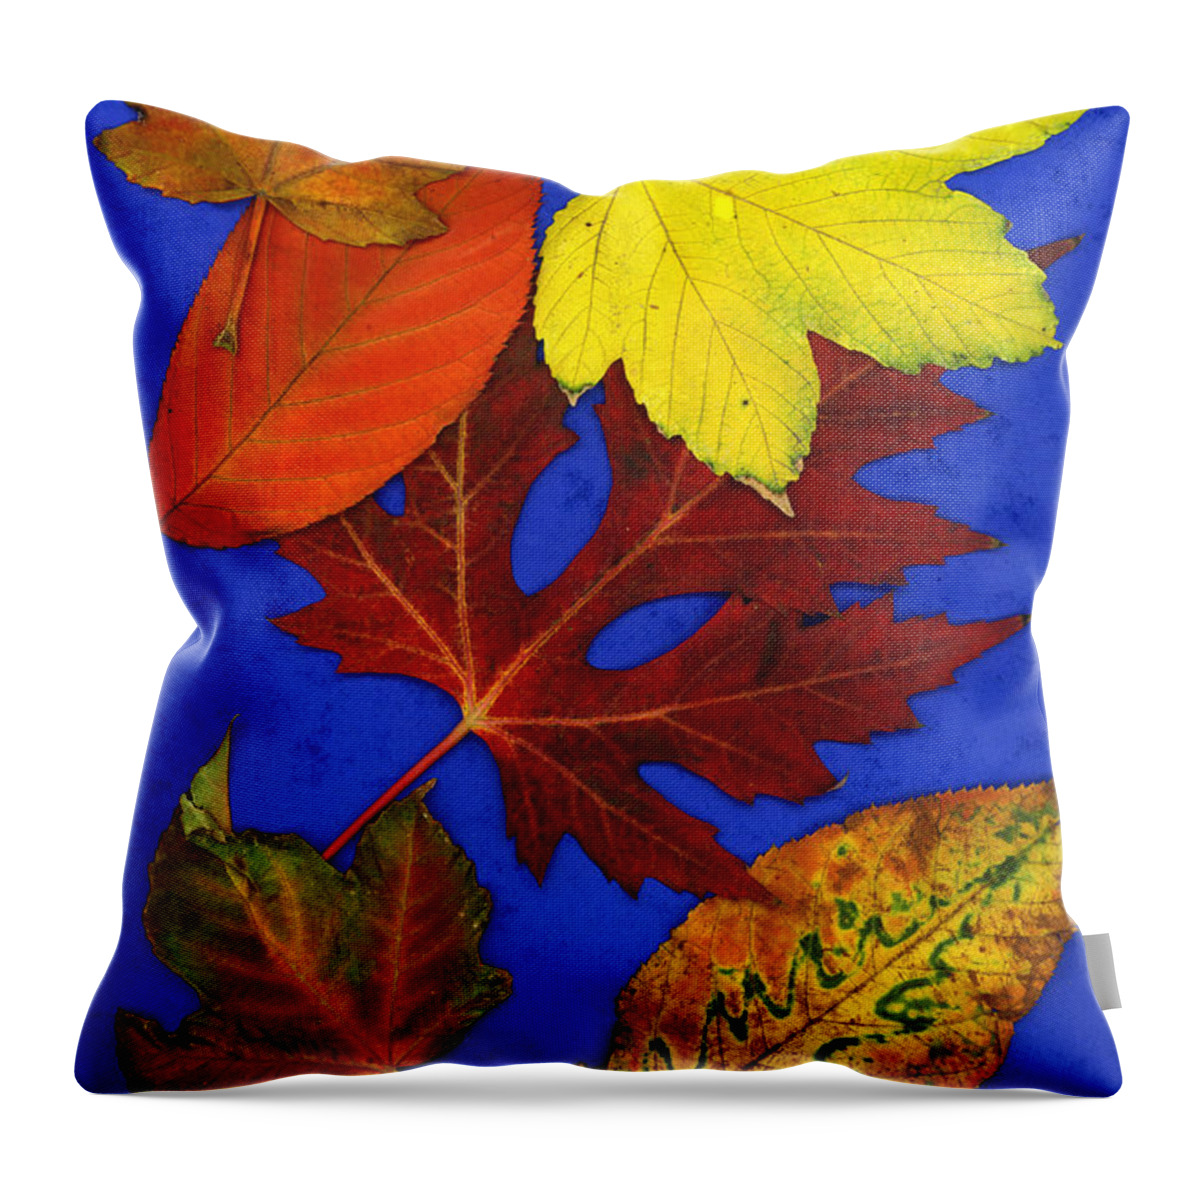 Fall Leaves Throw Pillow featuring the photograph Fall Leaves by AJ Photos